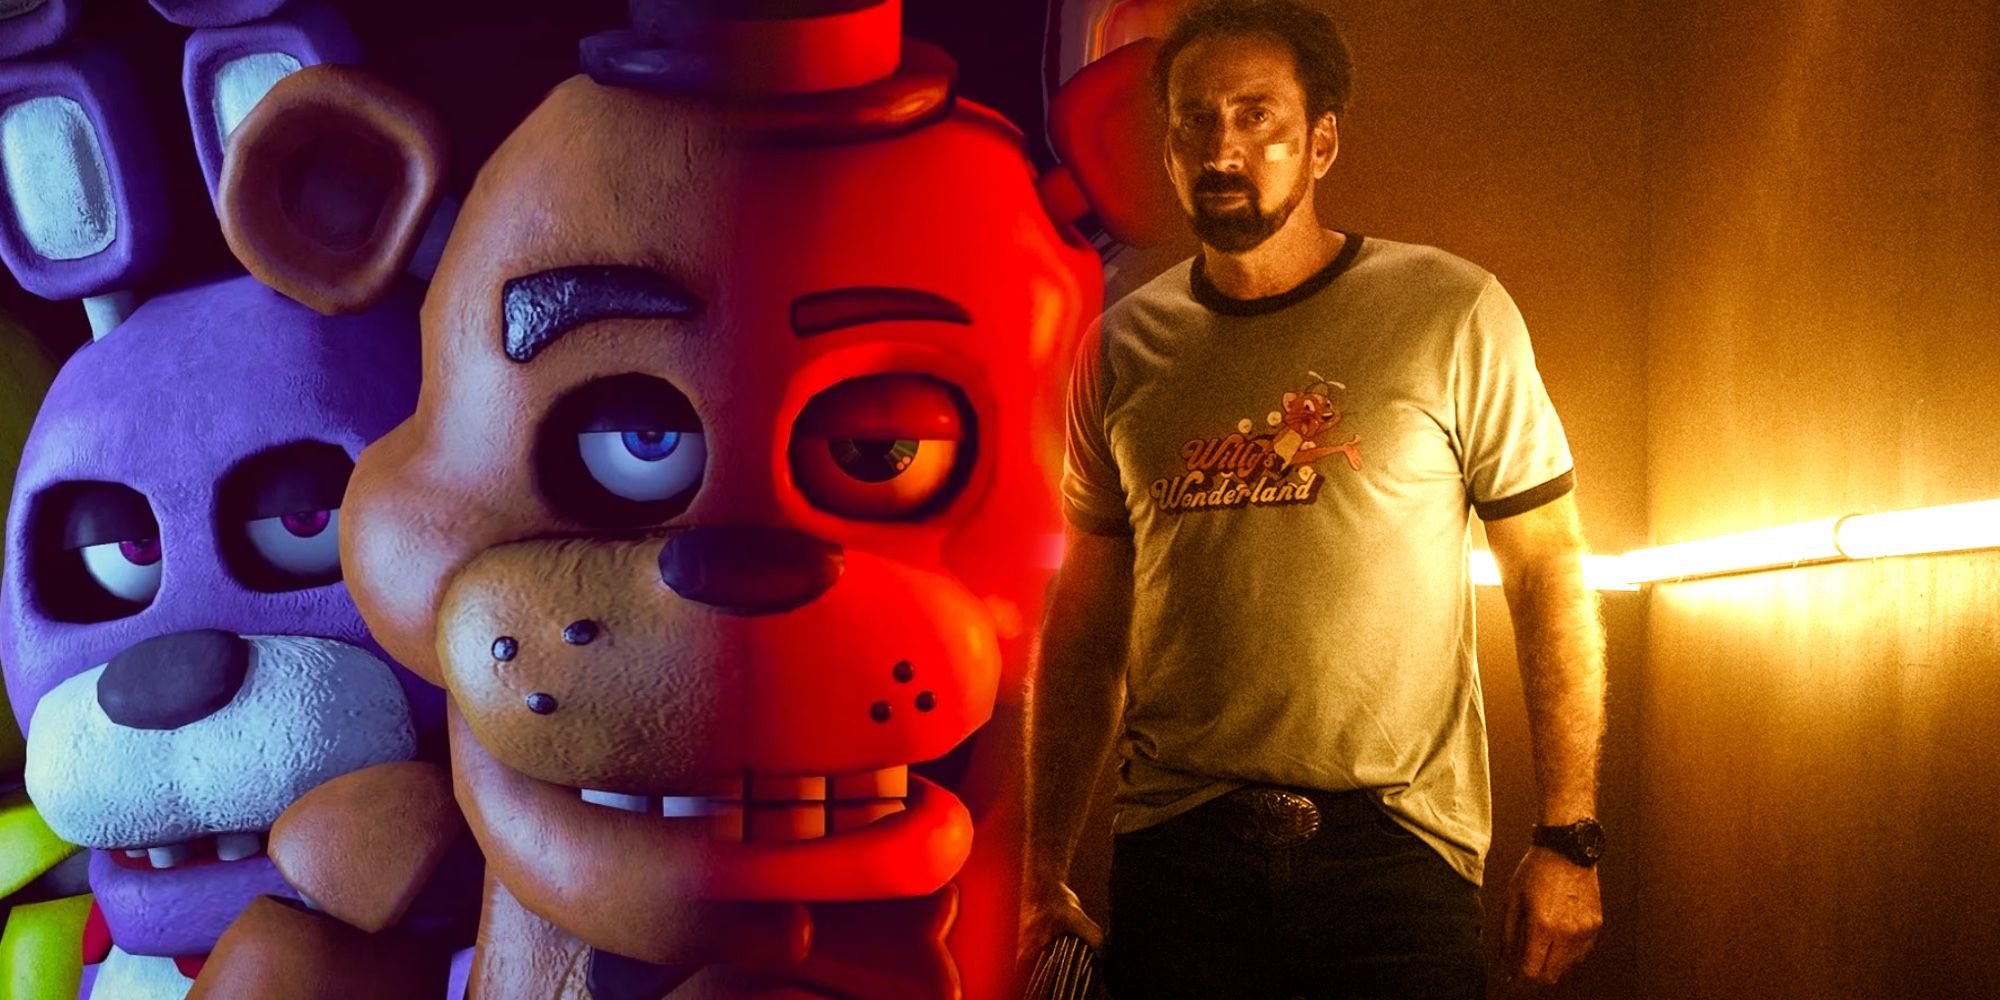 Nicolas Cage fights off sinister animatronic characters in new funhouse  thriller Willy's Wonderland